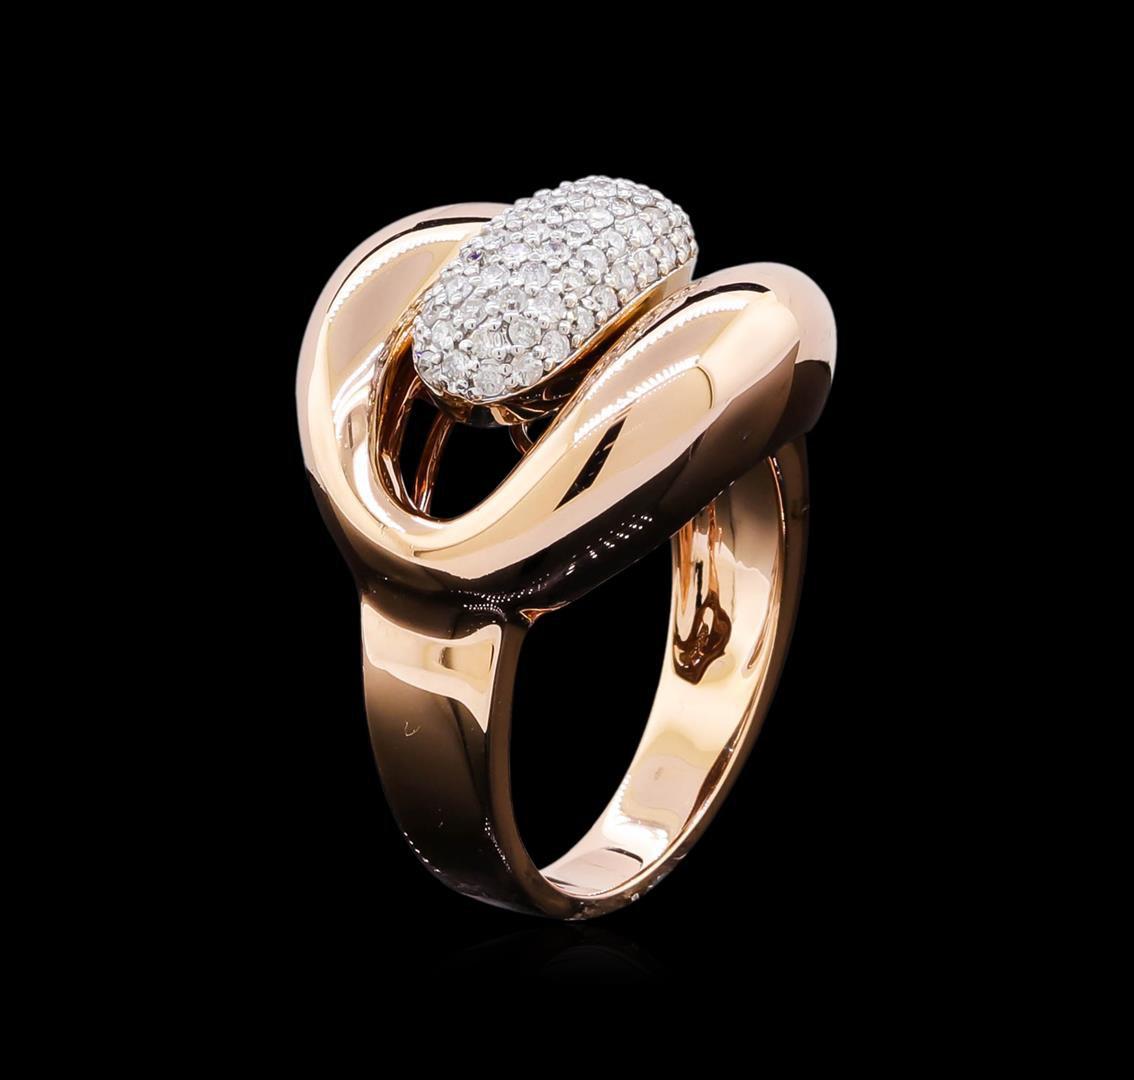 0.45 ctw Diamond Ring - 14KT Two-Tone Gold